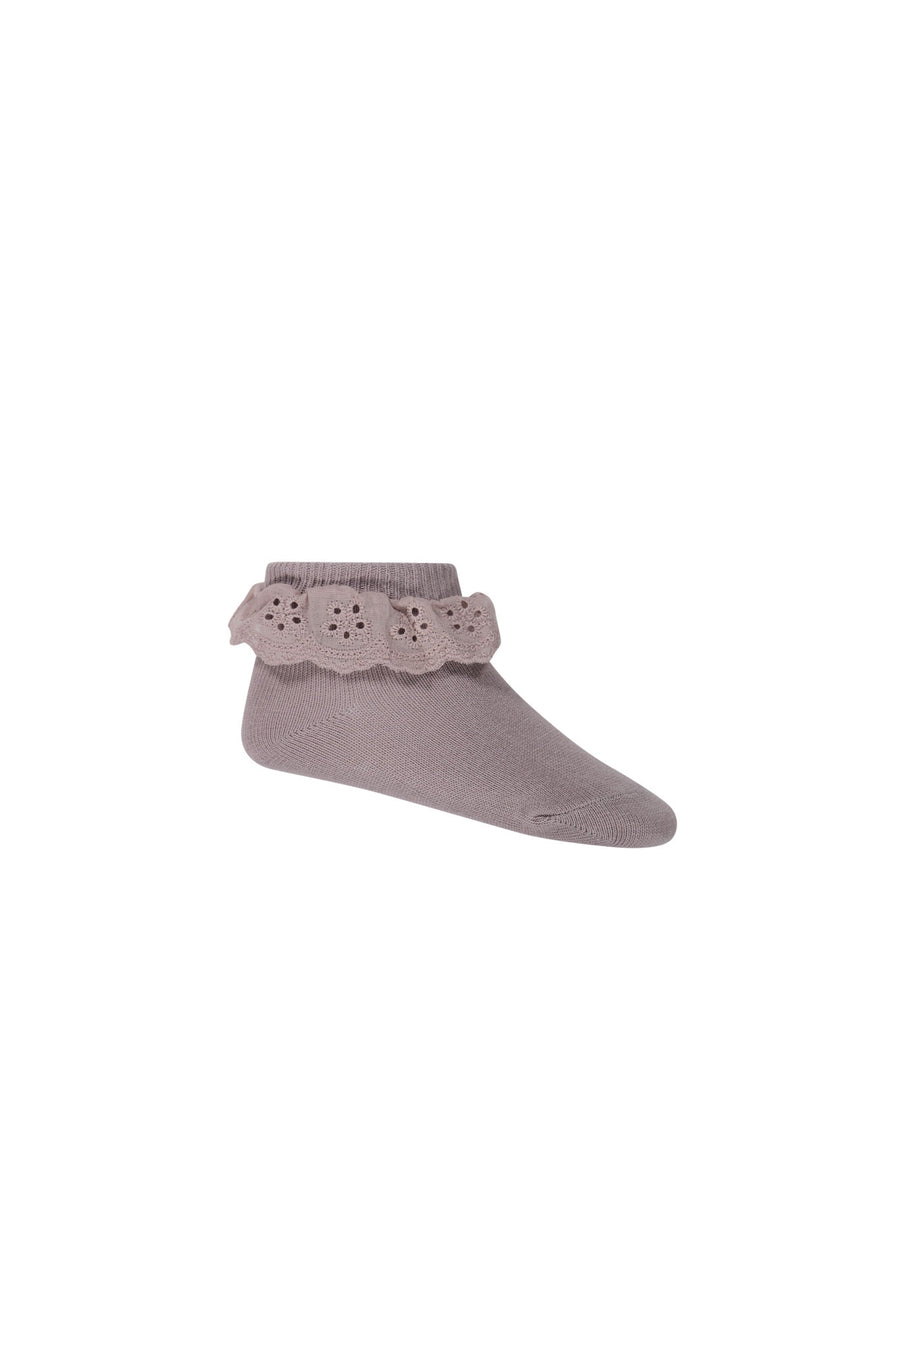 Frill Ankle Sock - Softest Mauve Childrens Sock from Jamie Kay NZ